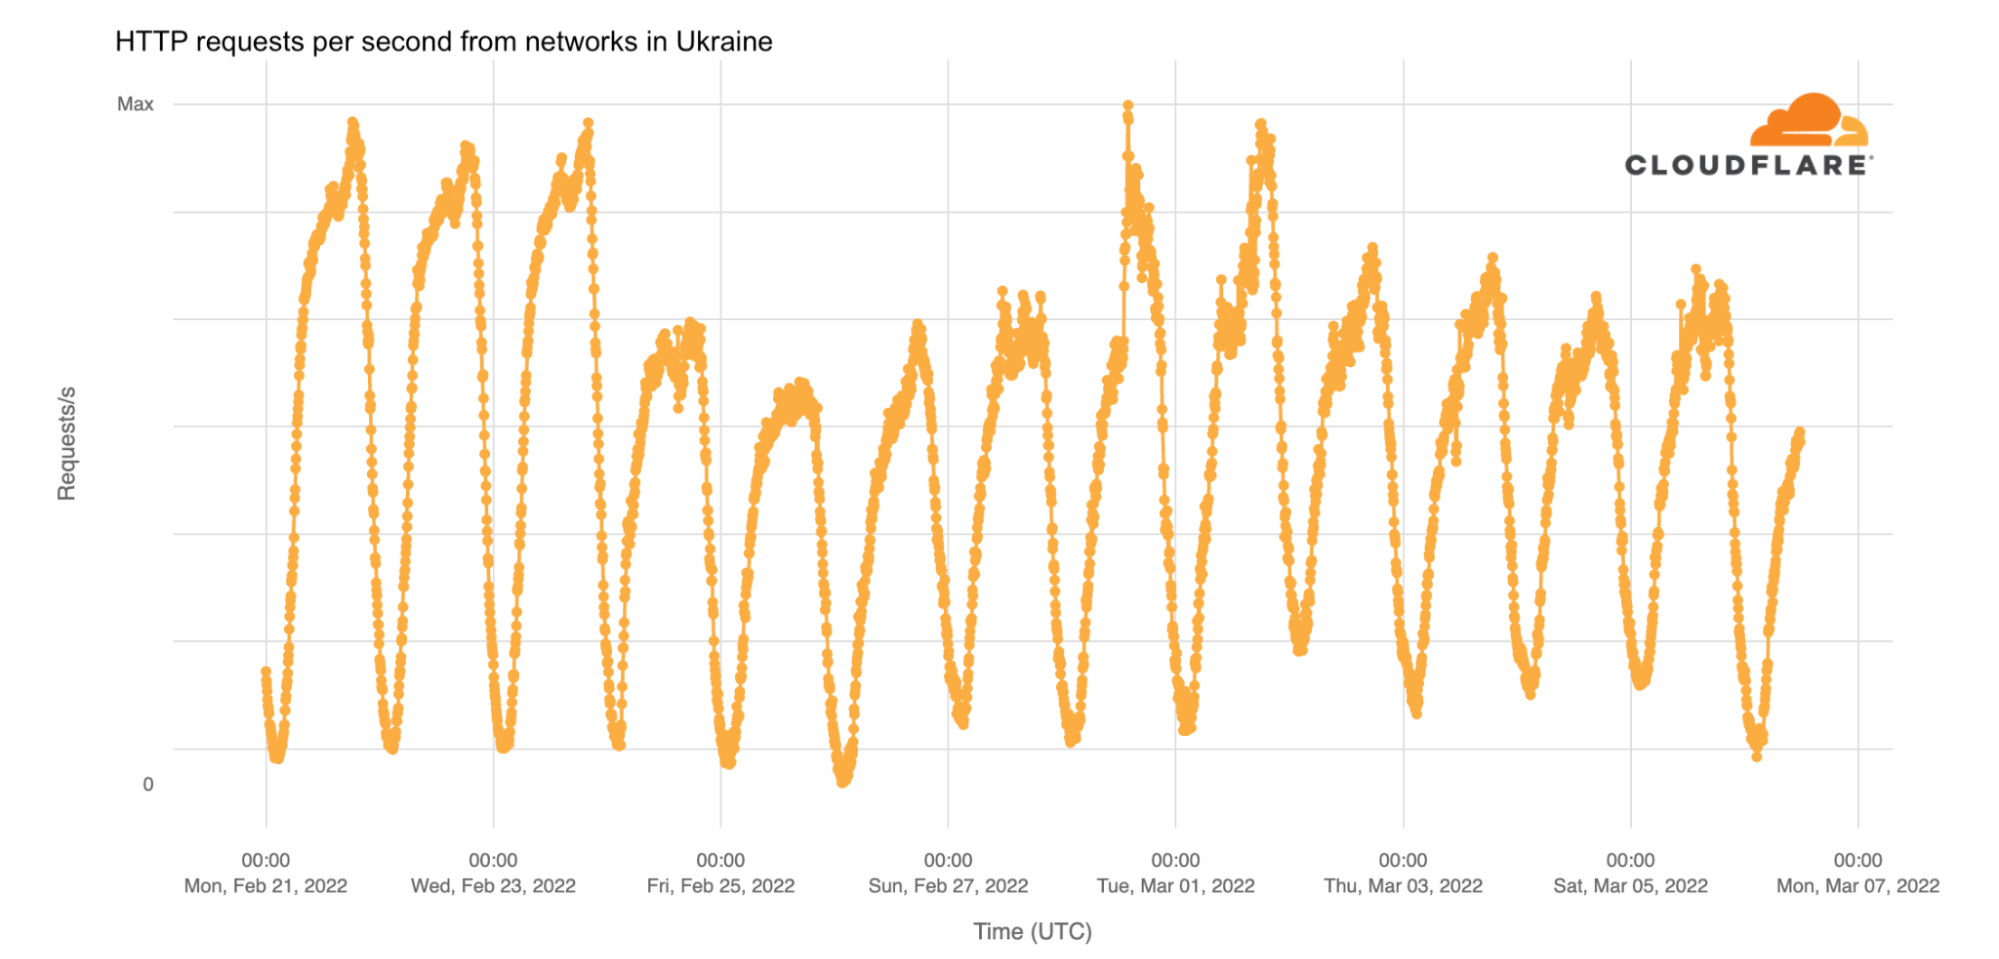 Steps we've taken around Cloudflare's services in Ukraine, Belarus, and Russia